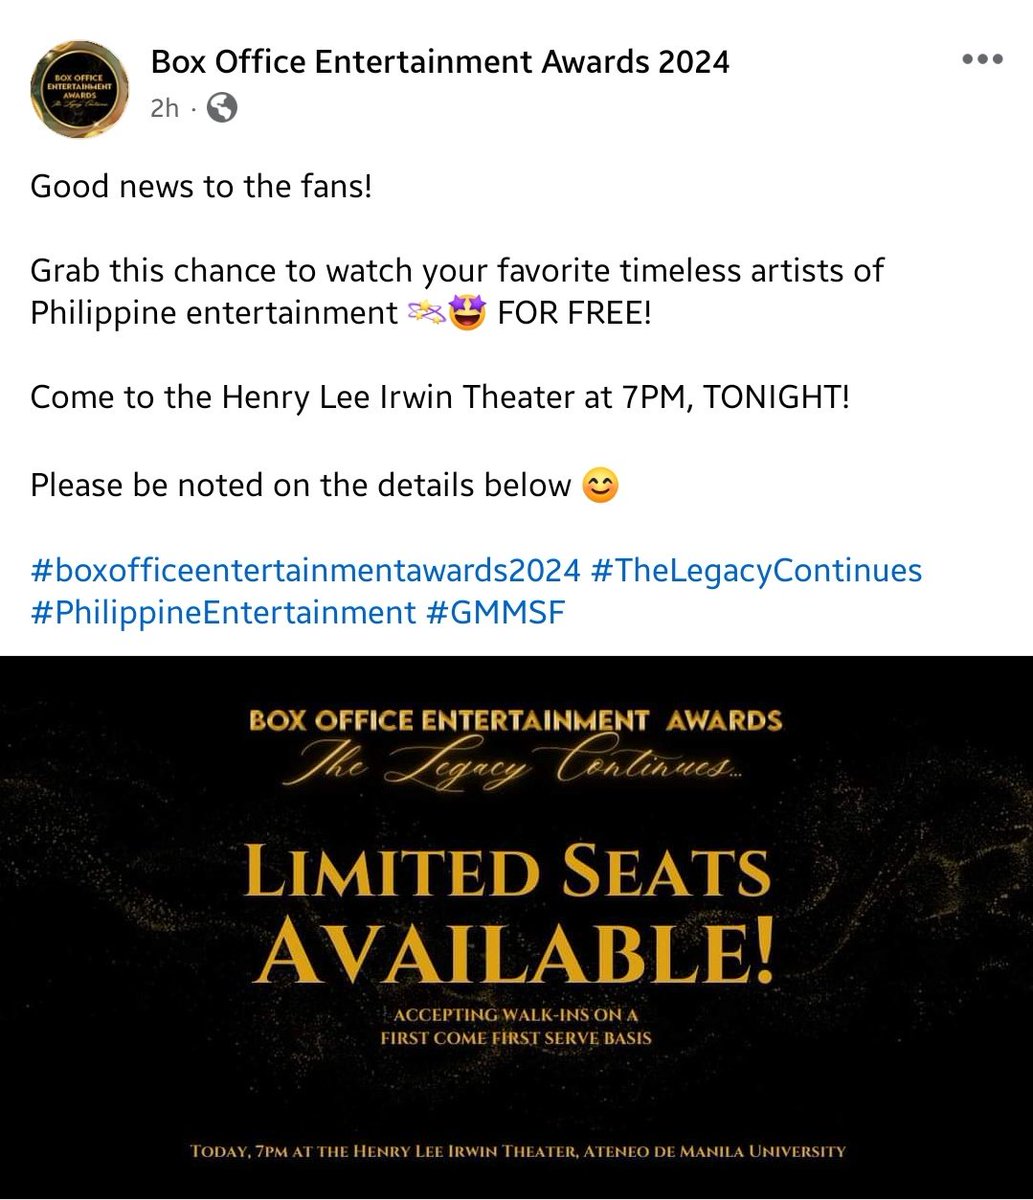 @bellemariano02 👀 here BUBBLIES!!!

#BoxOfficeEntertainmentAwards2024 #TheLegacyContinues #DonBelle #GMMSF 
#DonnyPangilinan #BelleMariano